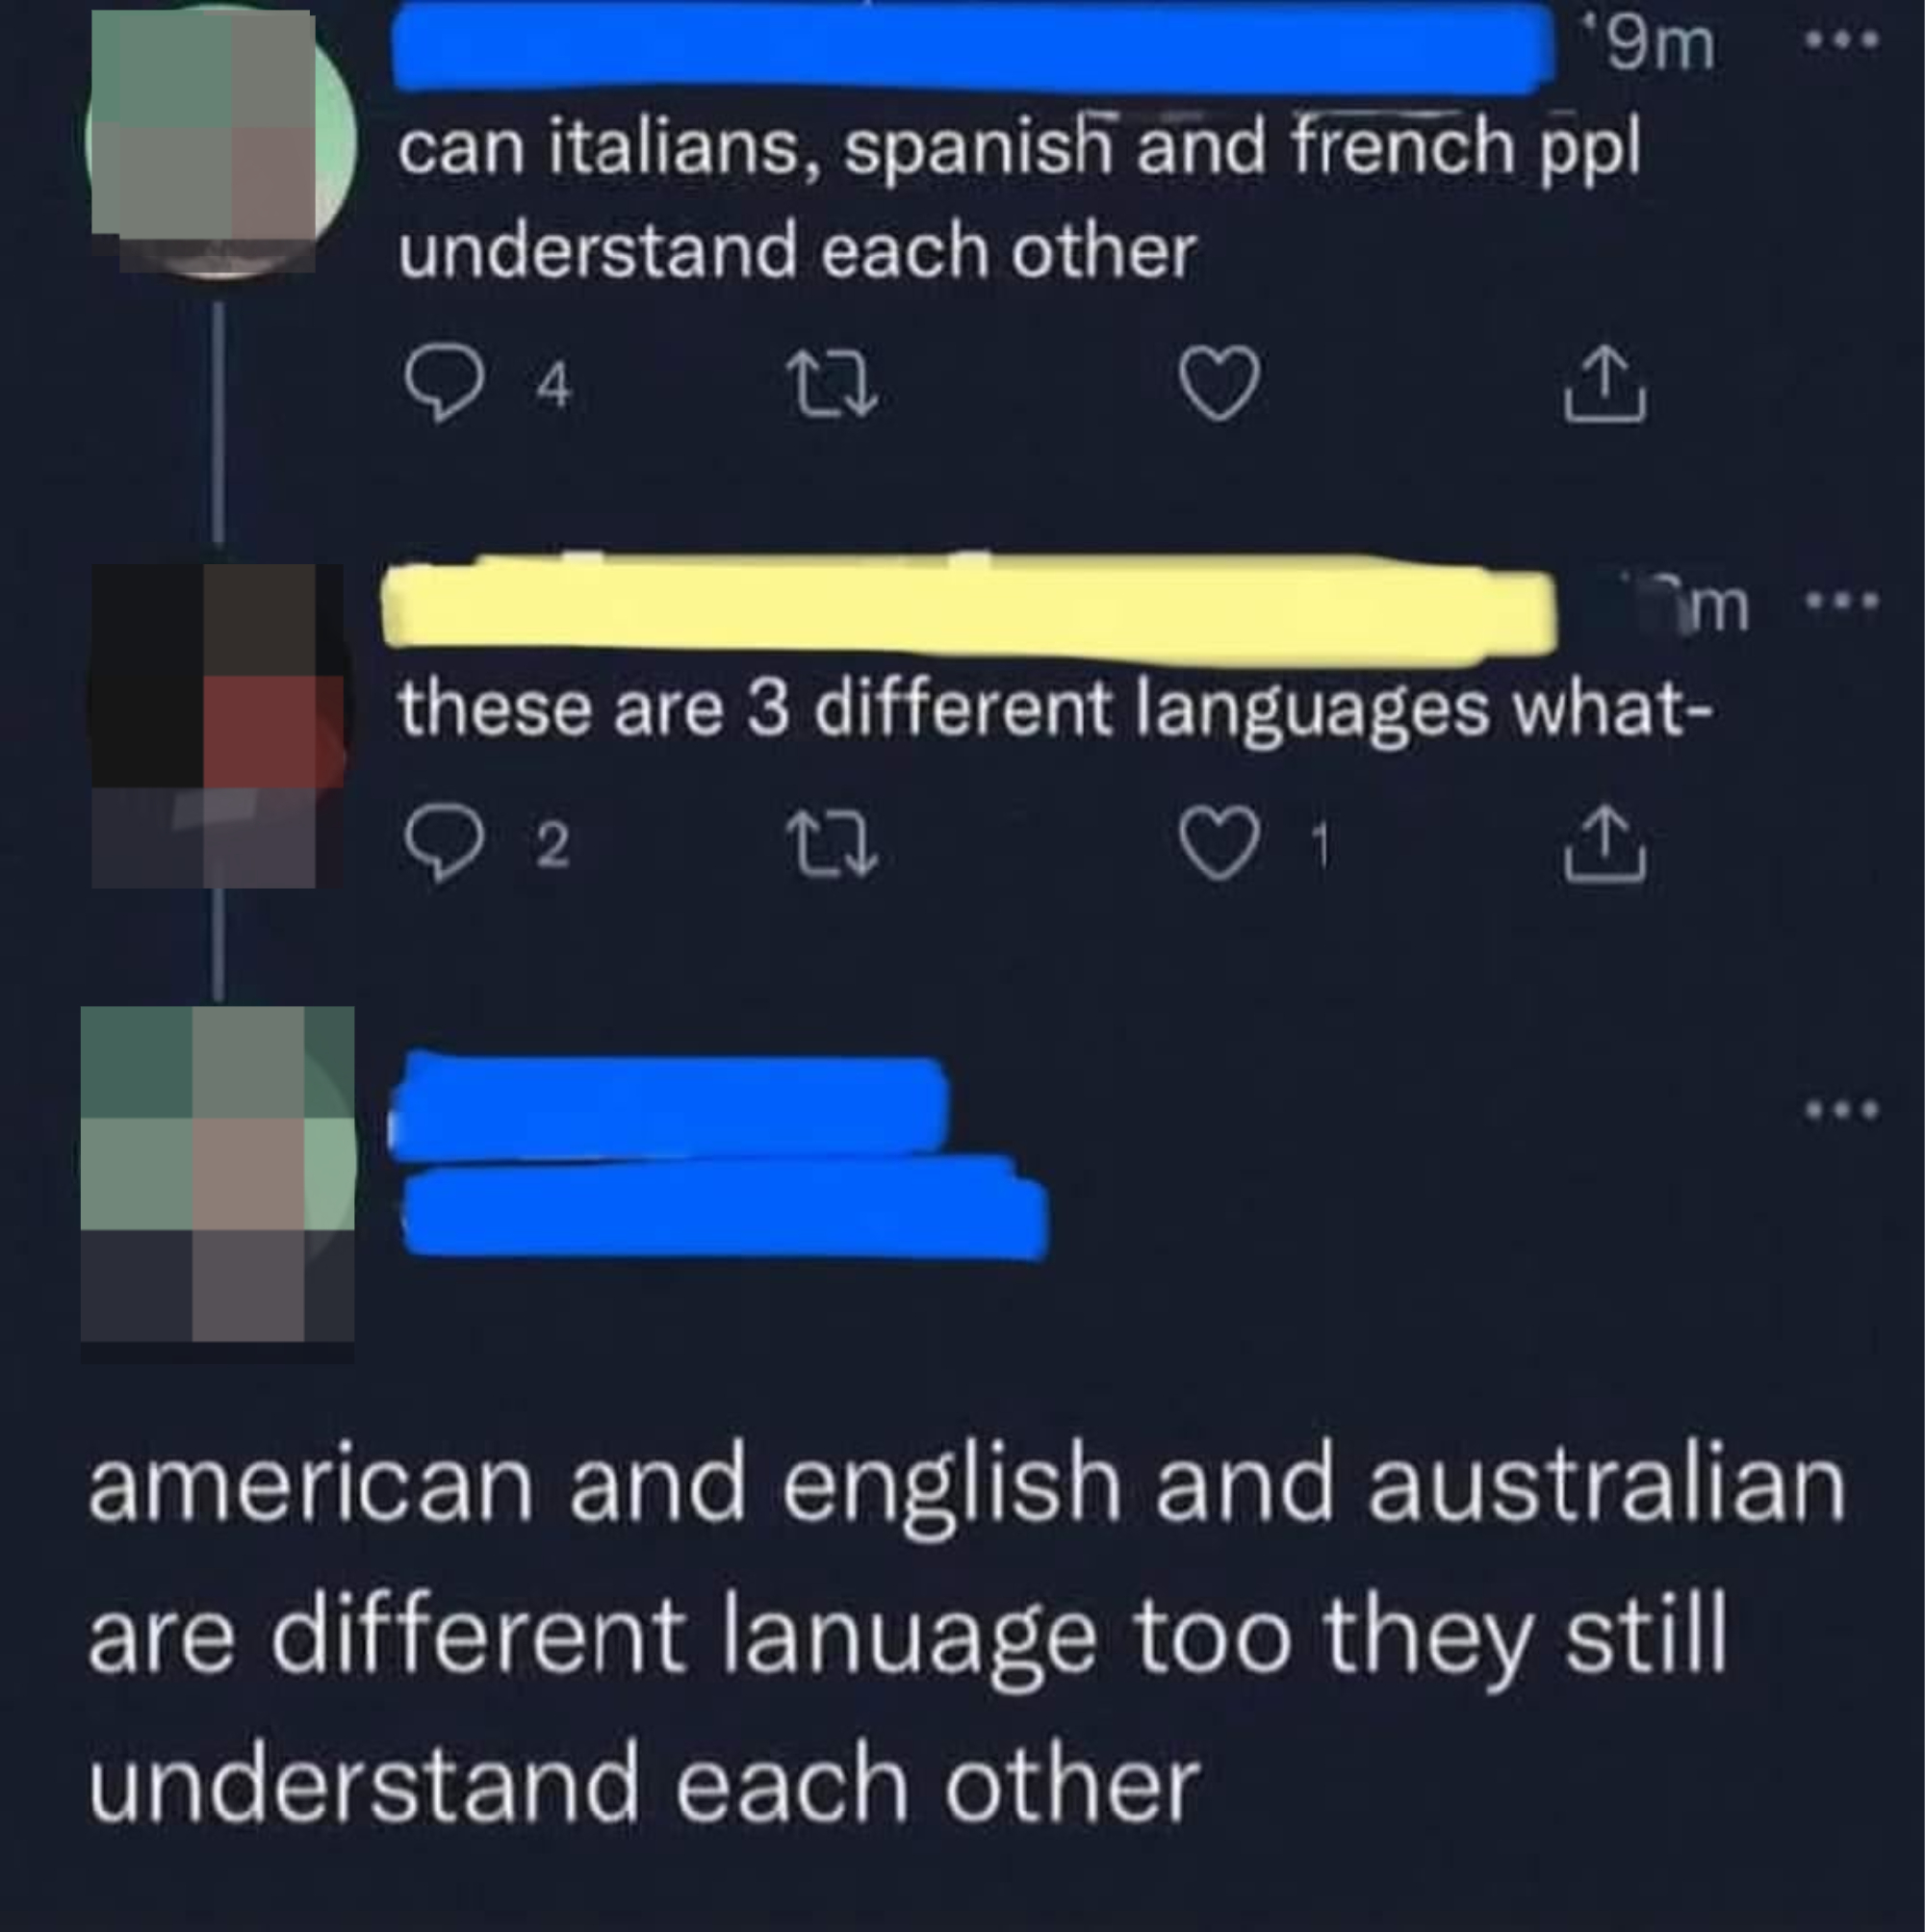 &quot;Can Italians, Spanish, and French ppl understand each other,&quot; &quot;these are 3 different languages,&quot; and &quot;American and English and Australian are different language too they still understand each other&quot;